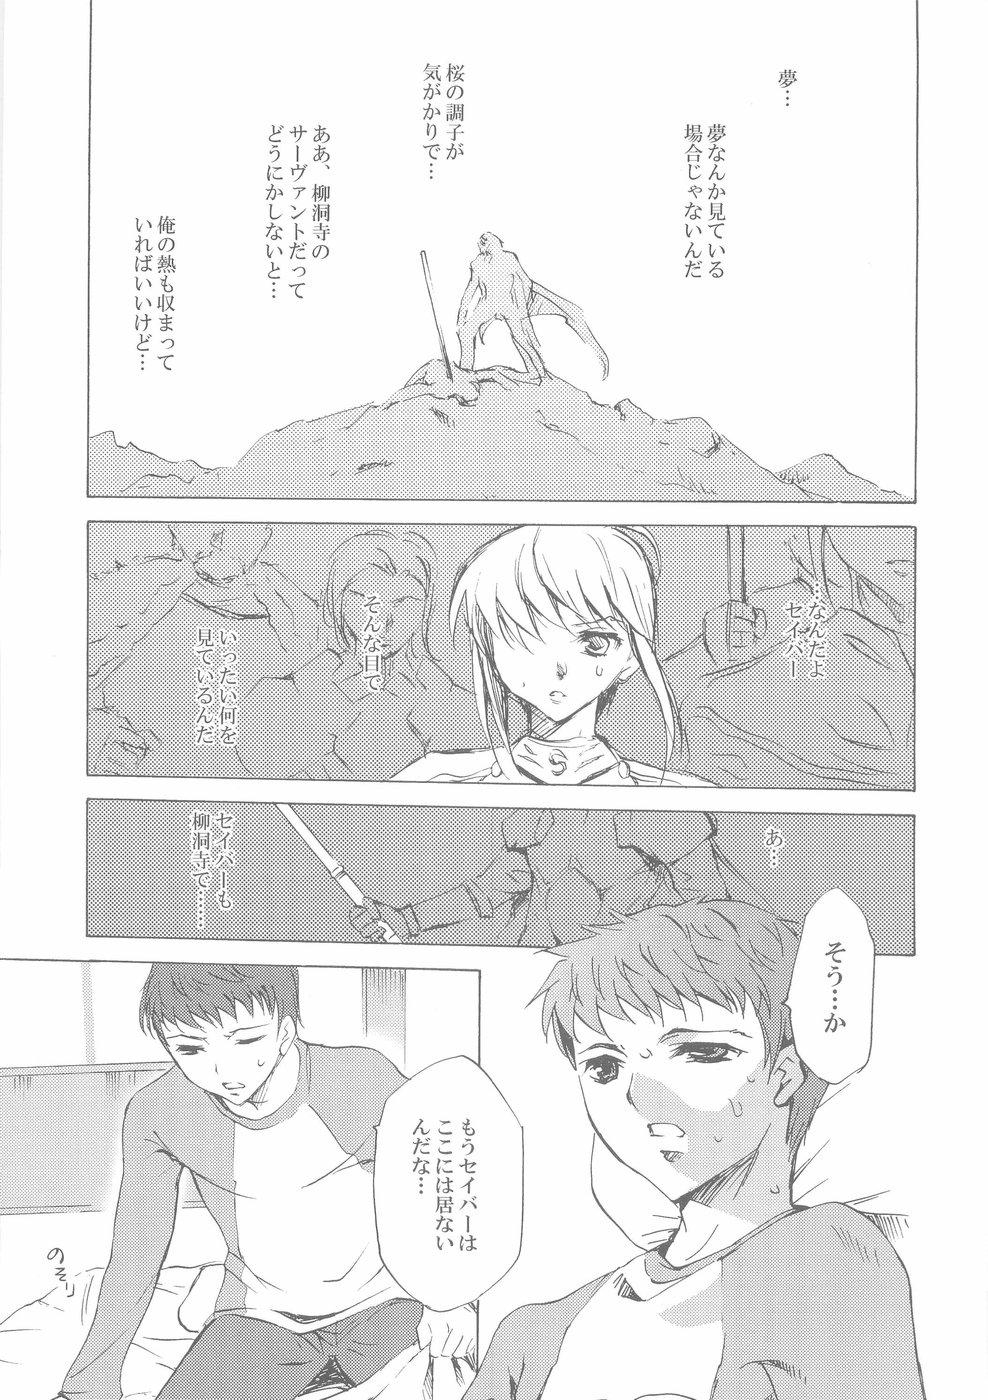 Rough Face II stay with my love - Fate stay night Innocent - Page 2